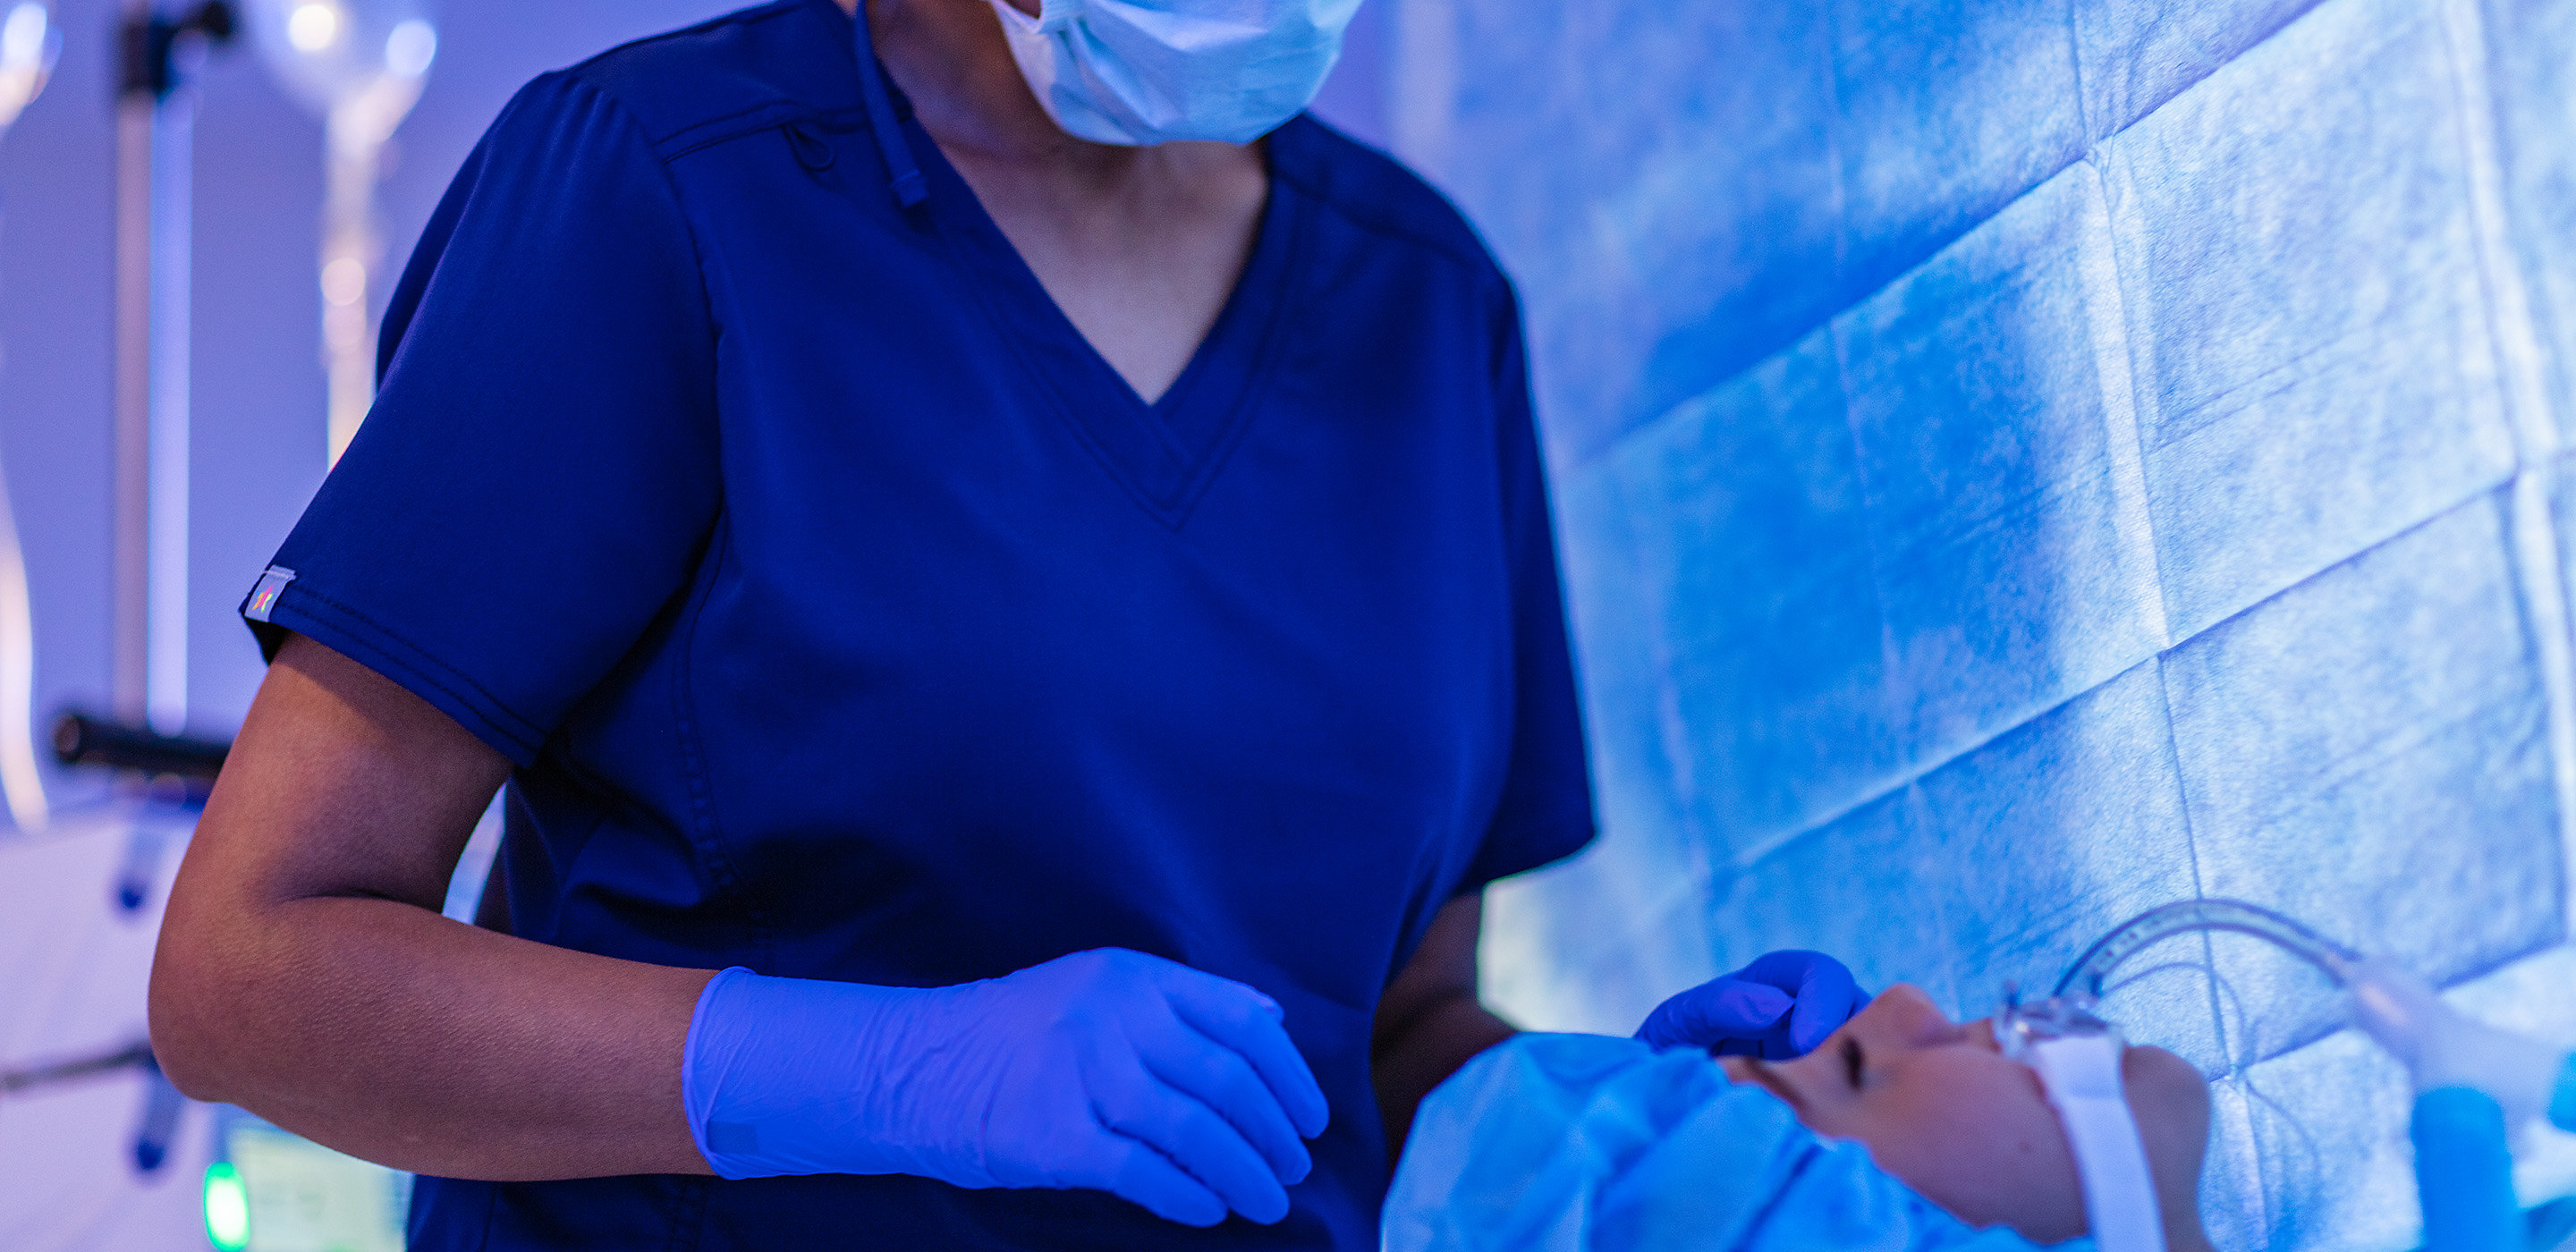 A surgical clinician watches over her patient during surgery